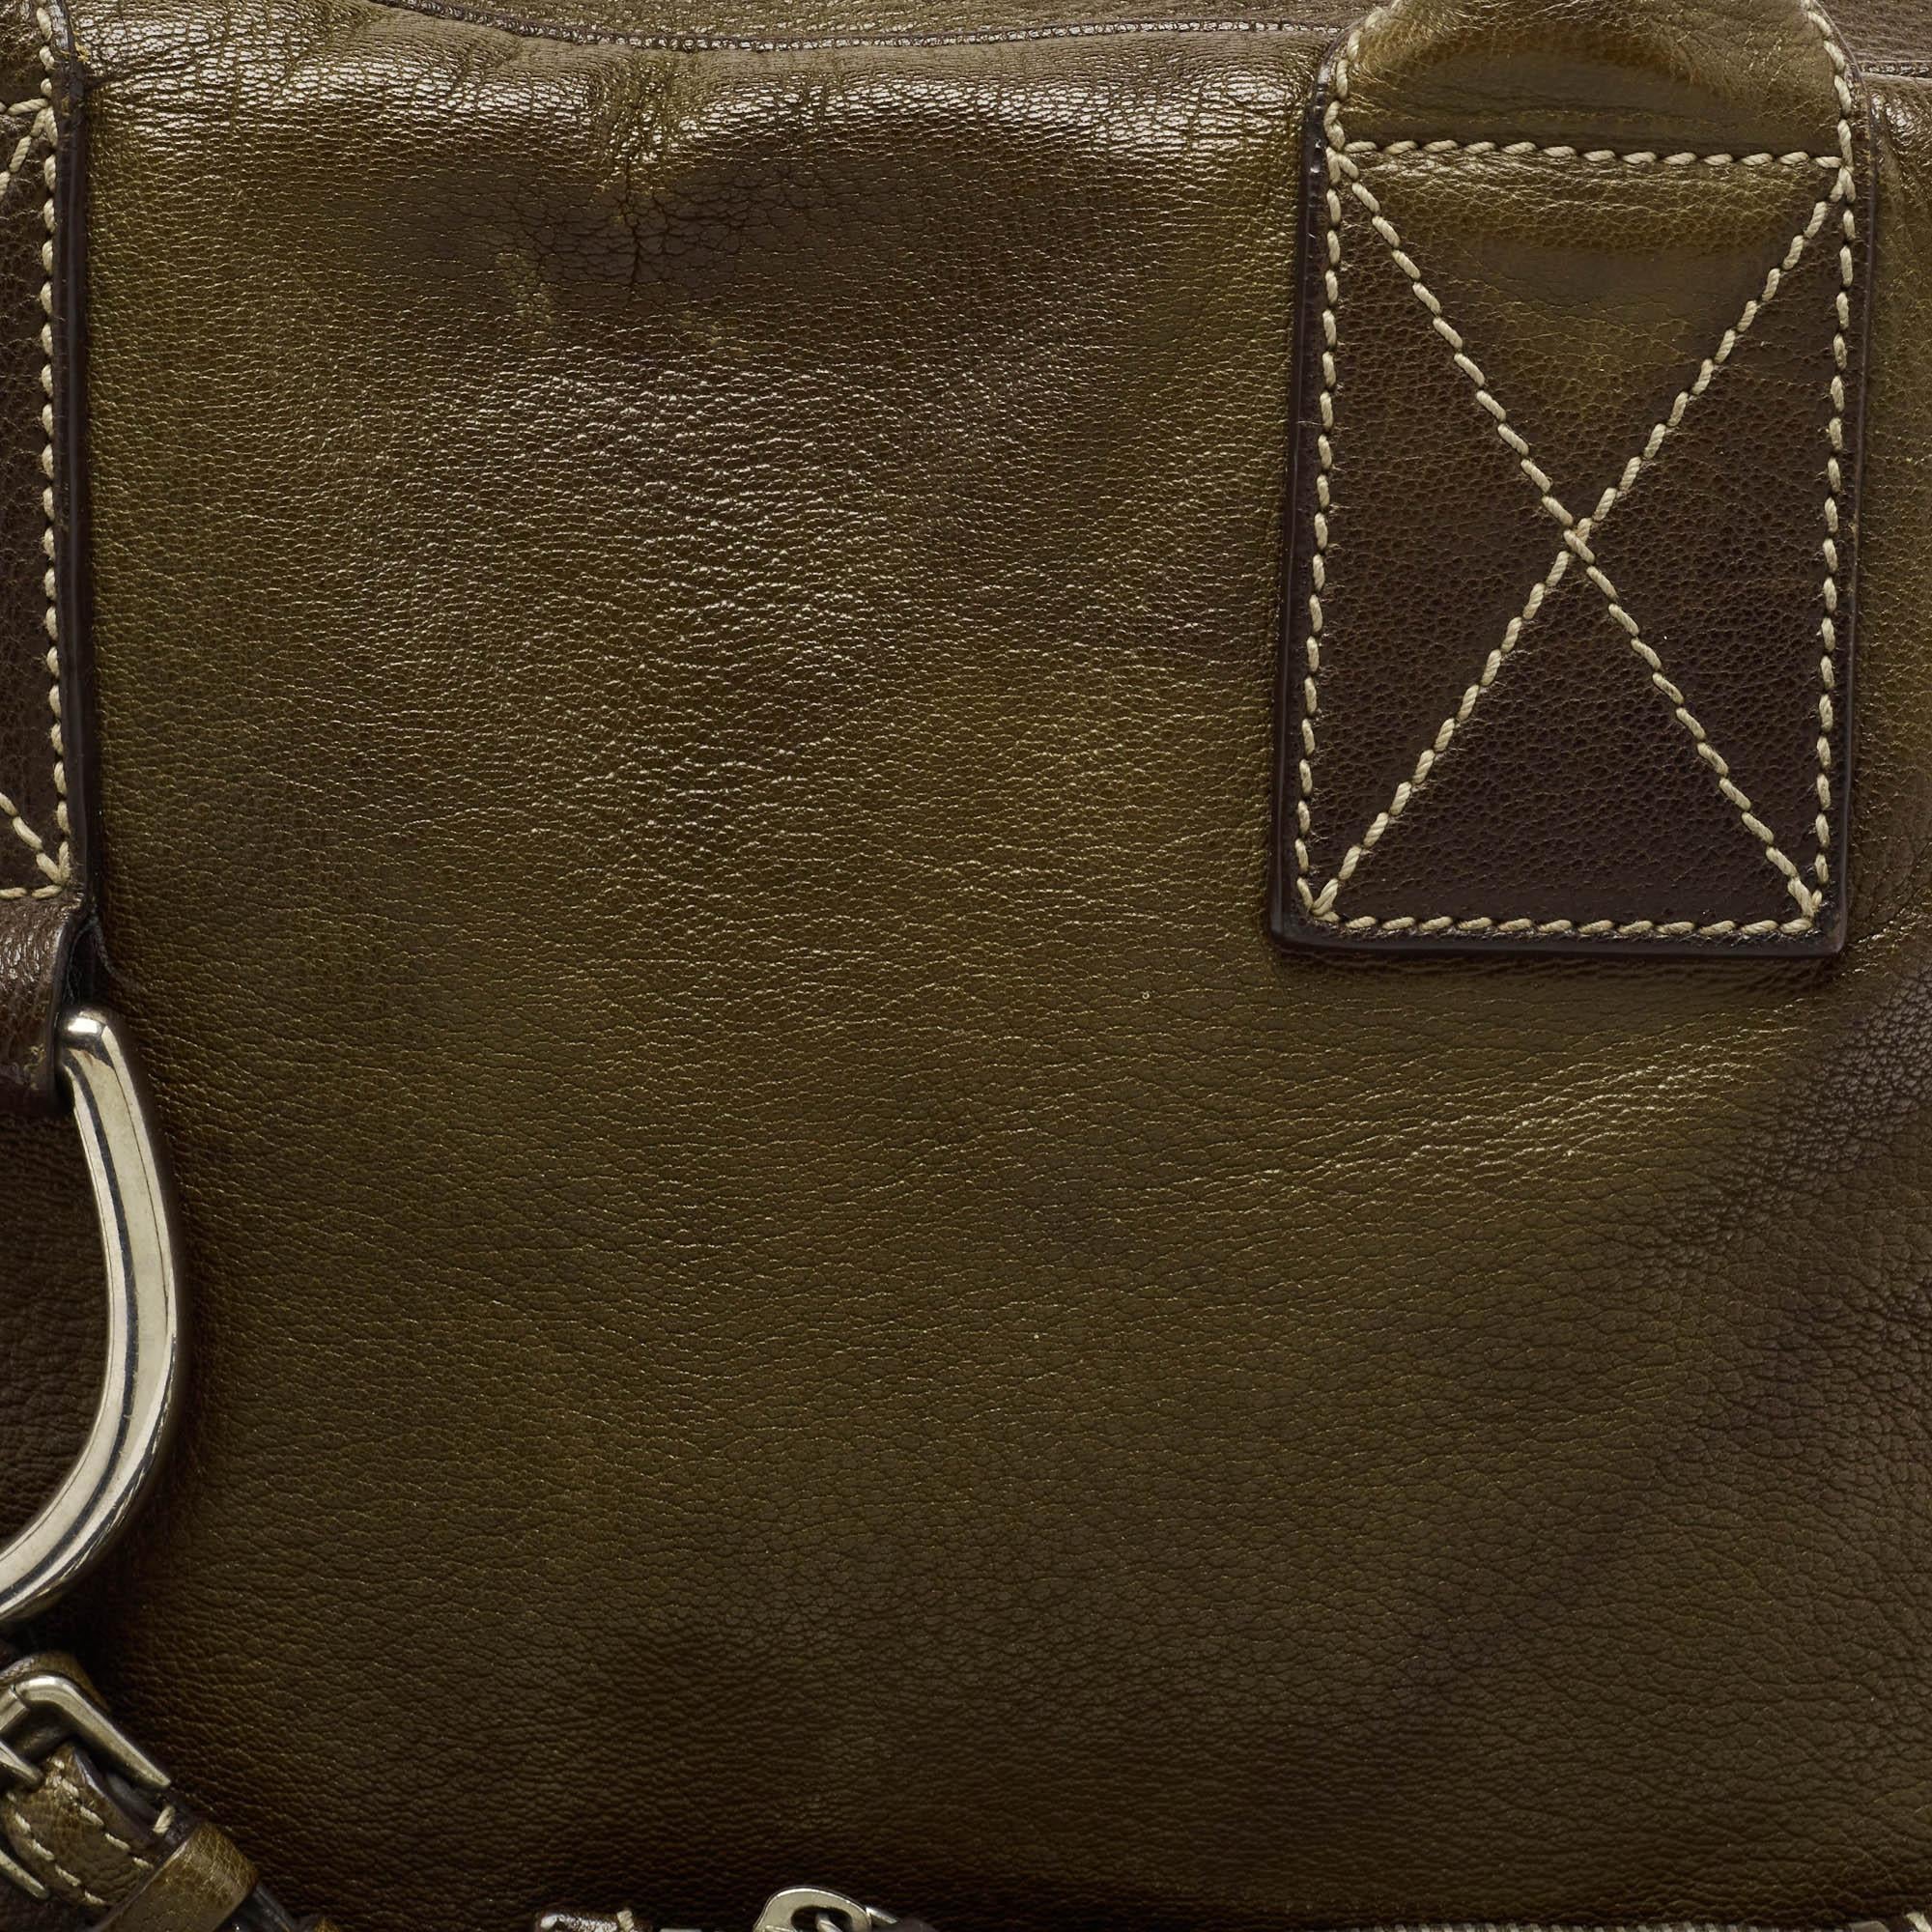 Dolce & Gabbana Olive Green Leather Miss Ice Satchel For Sale 1